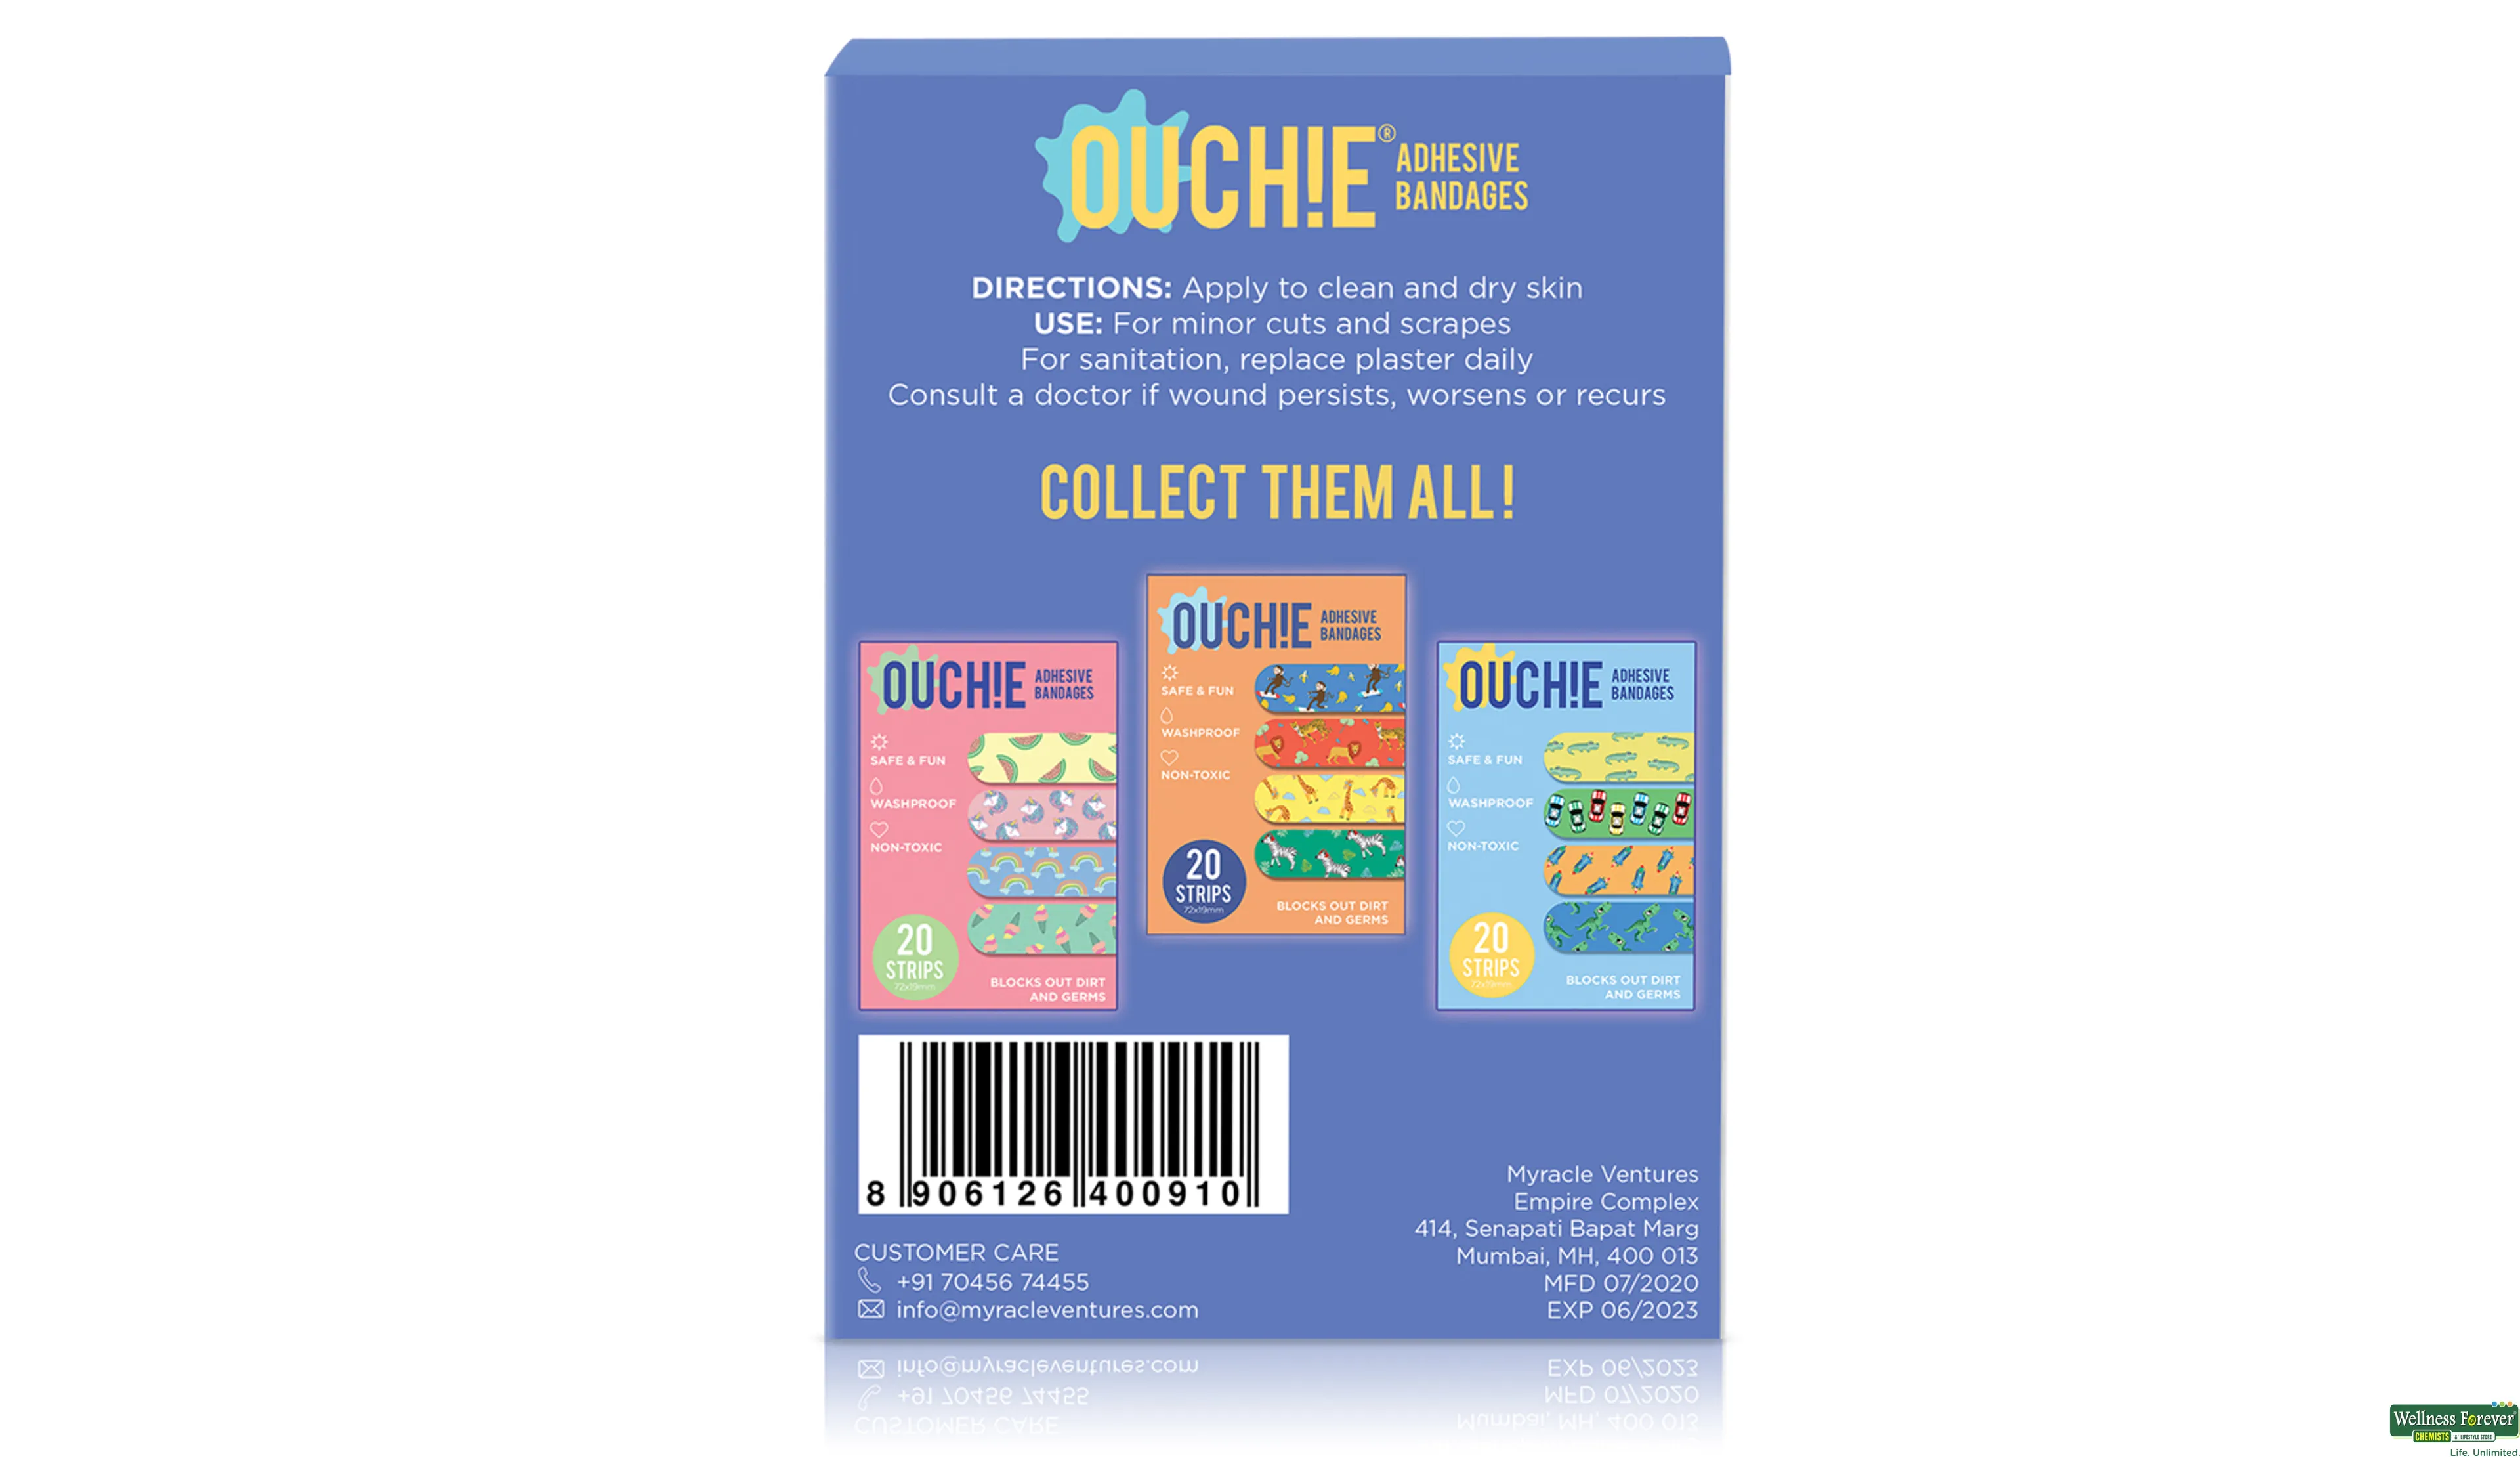 OUCHIE WASHPROOF SPACE BLUE 20PC- 2, 20PC, 